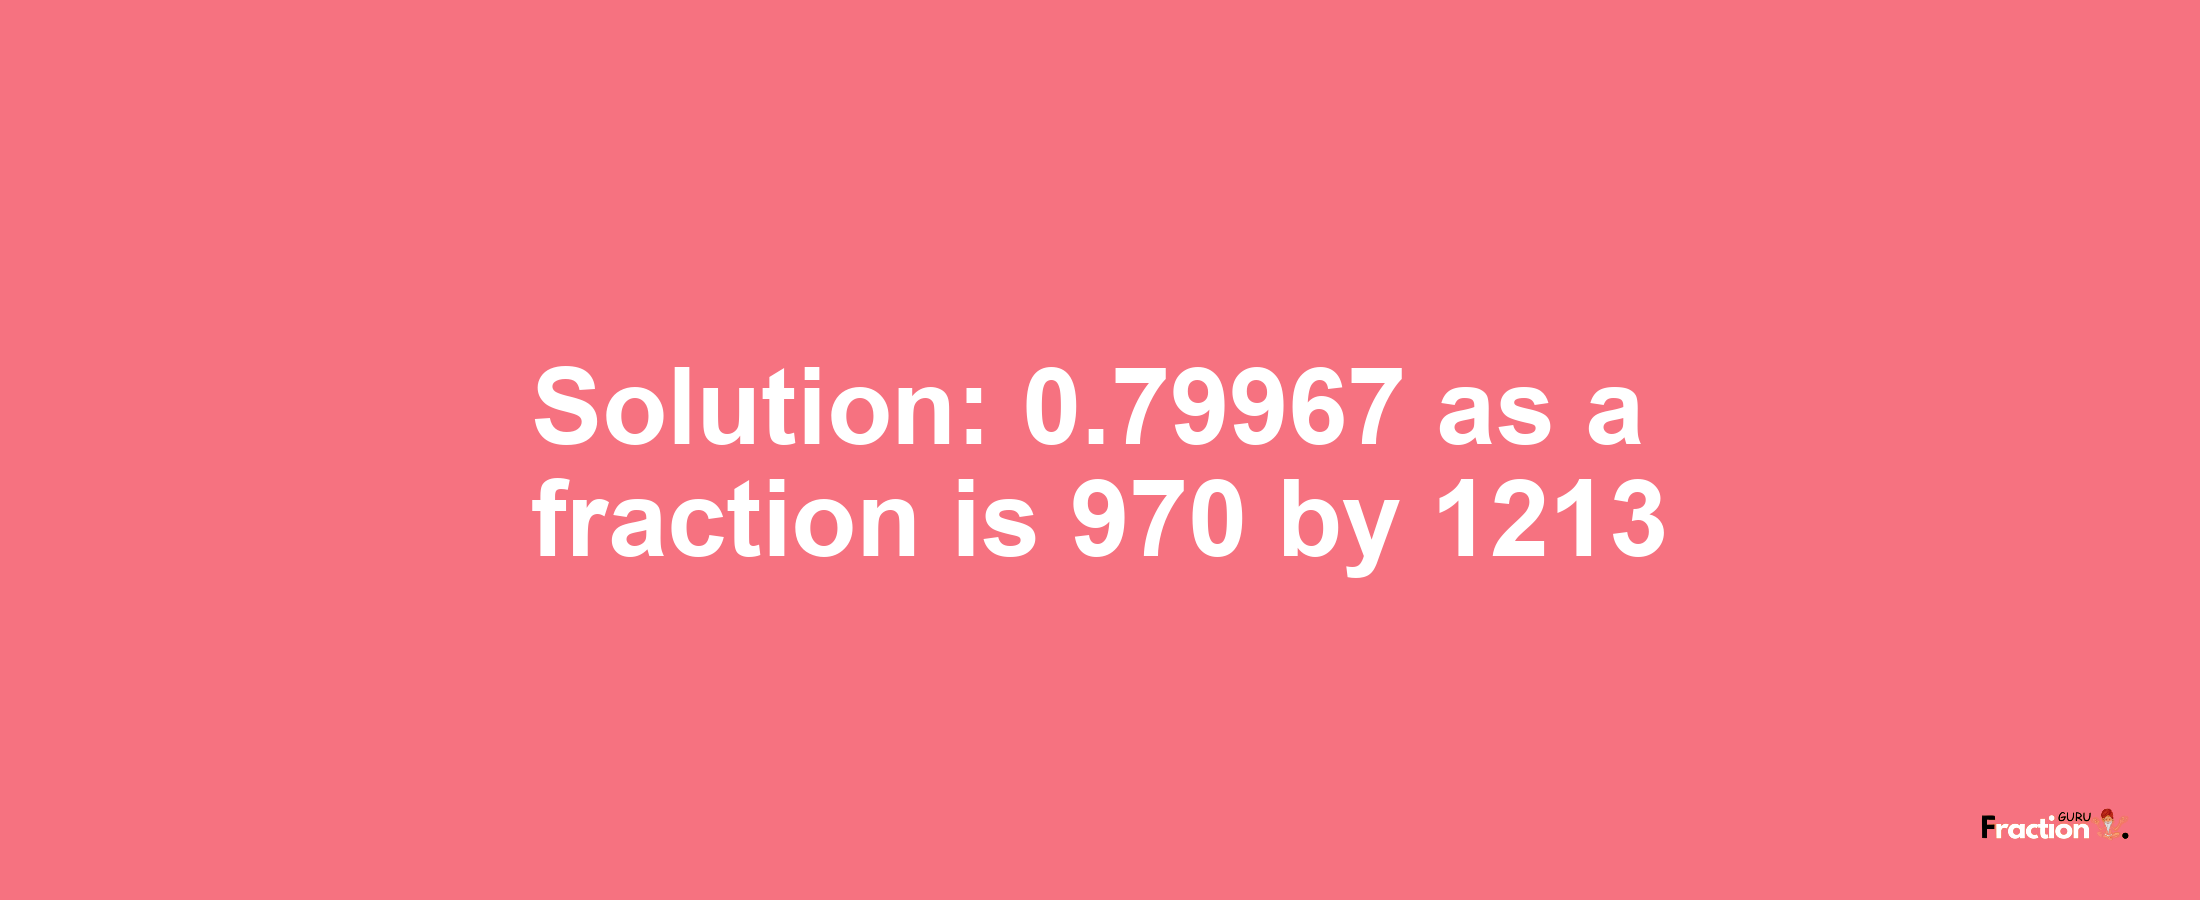 Solution:0.79967 as a fraction is 970/1213